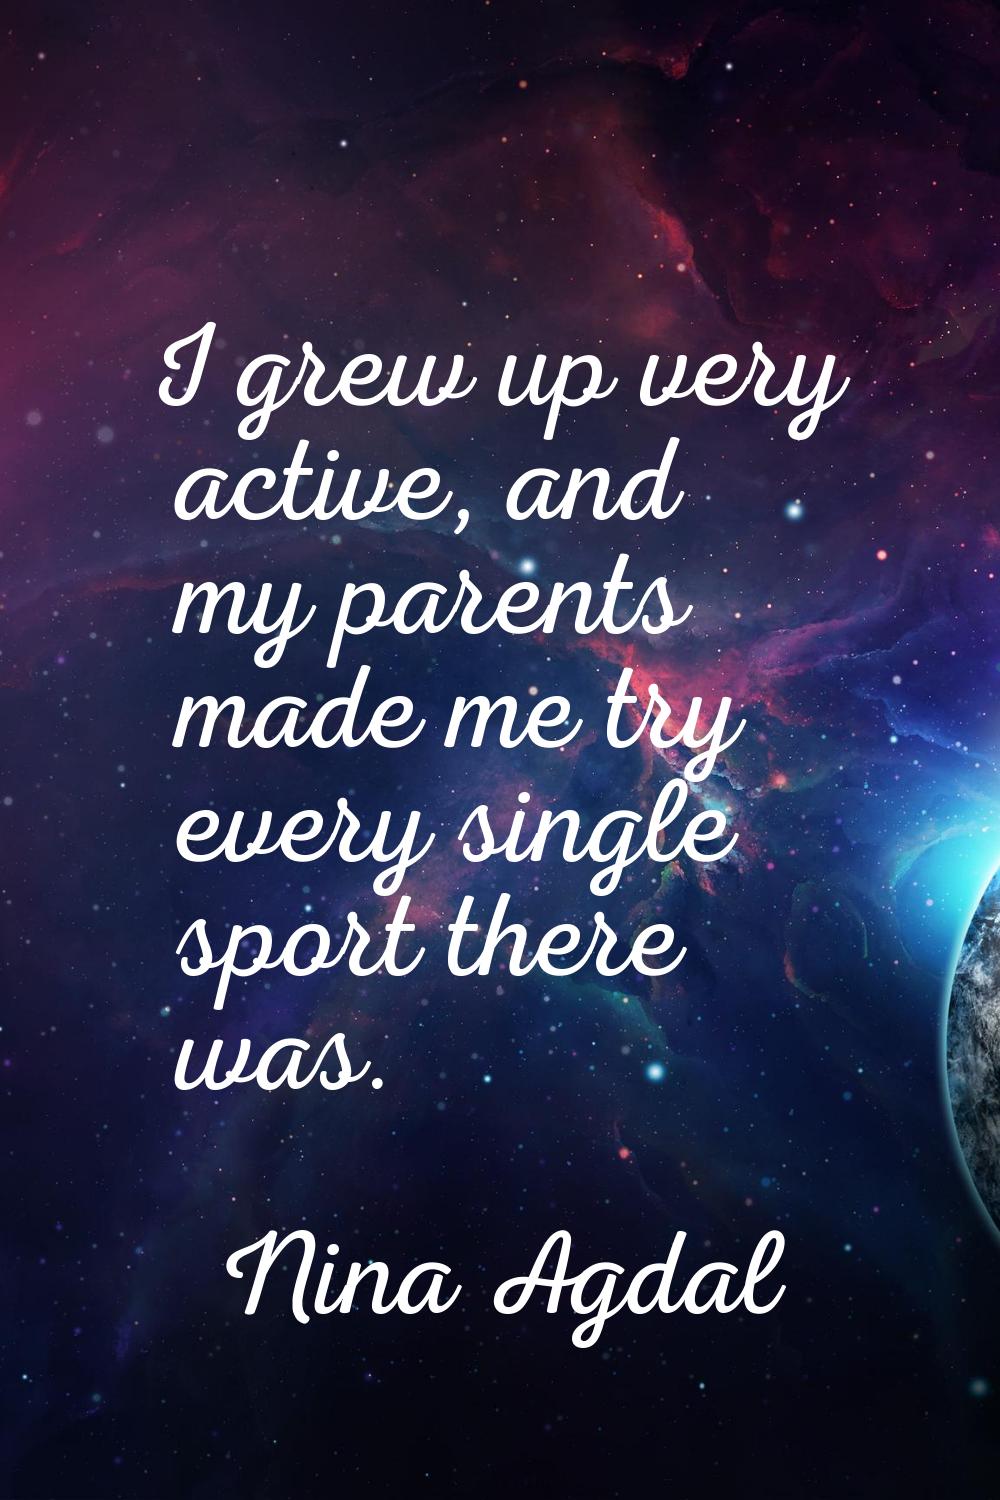 I grew up very active, and my parents made me try every single sport there was.